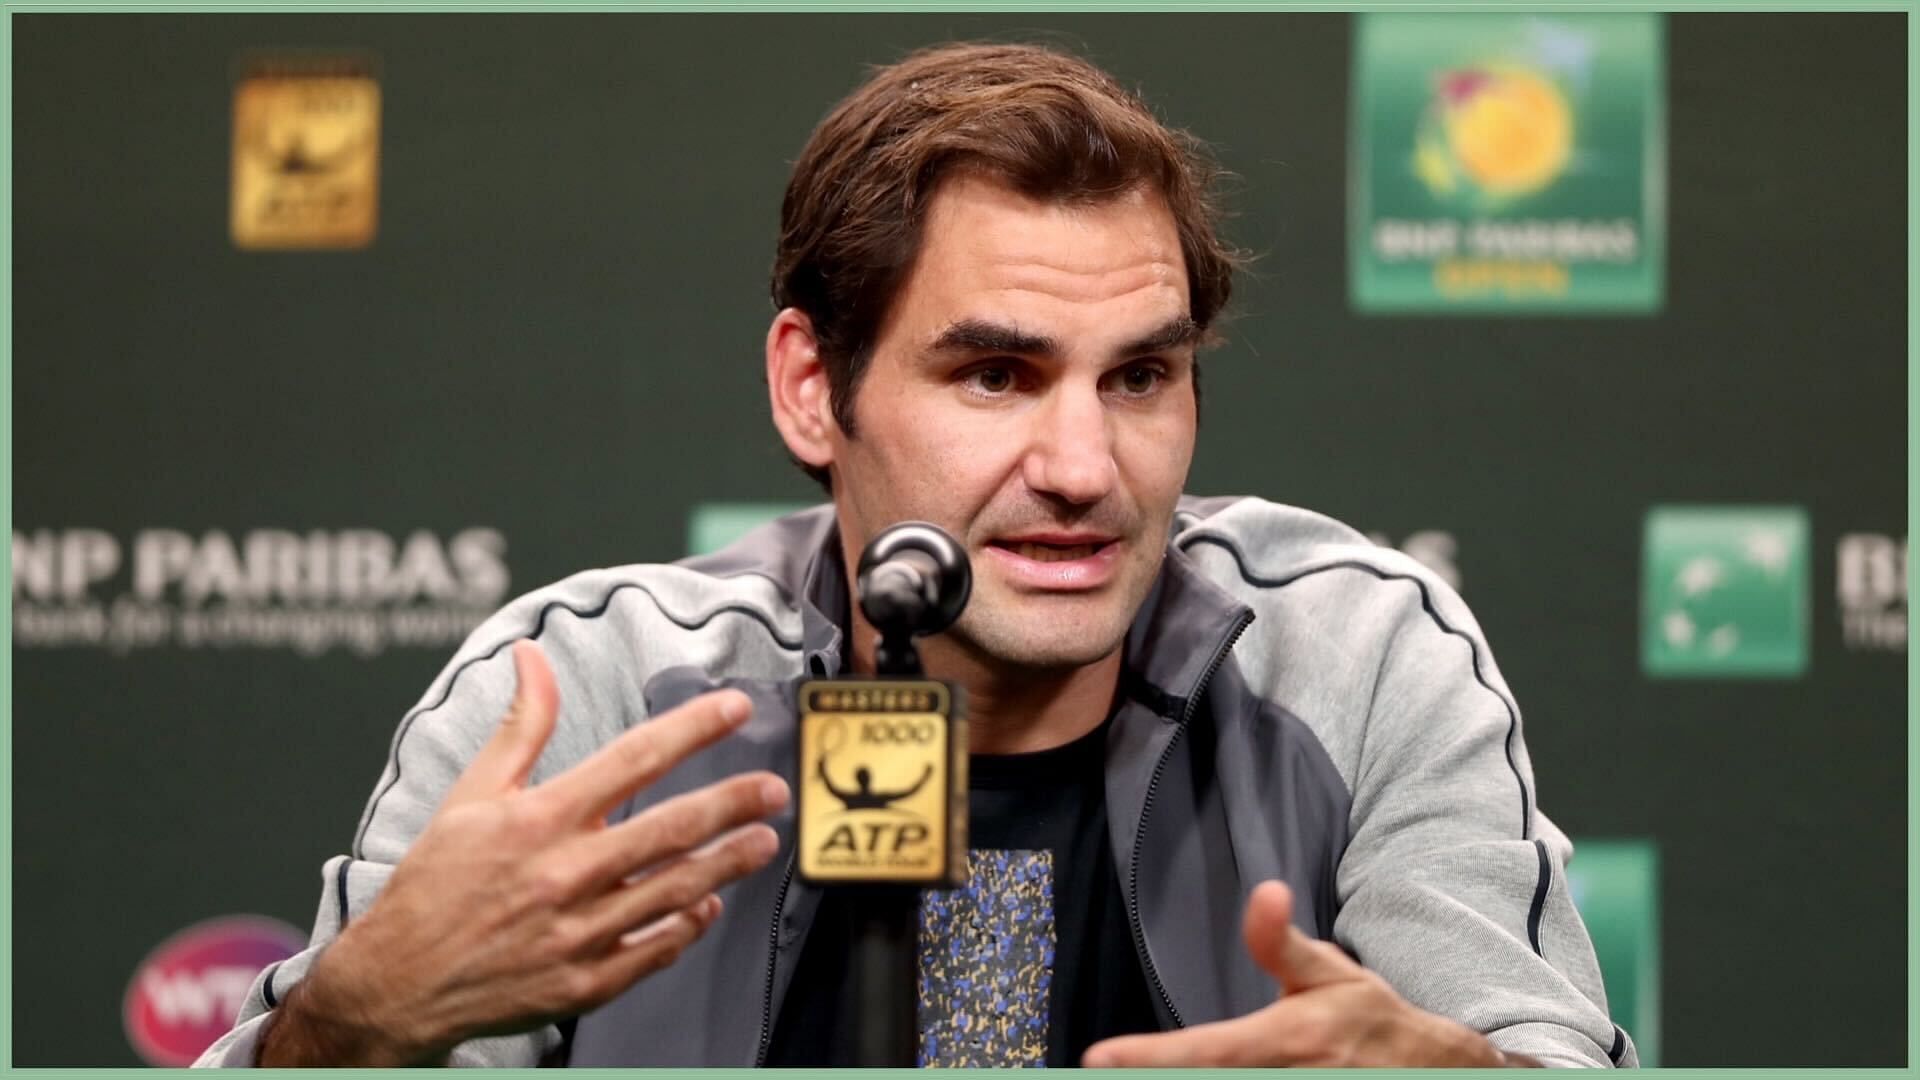 Roger Federer talks about his health